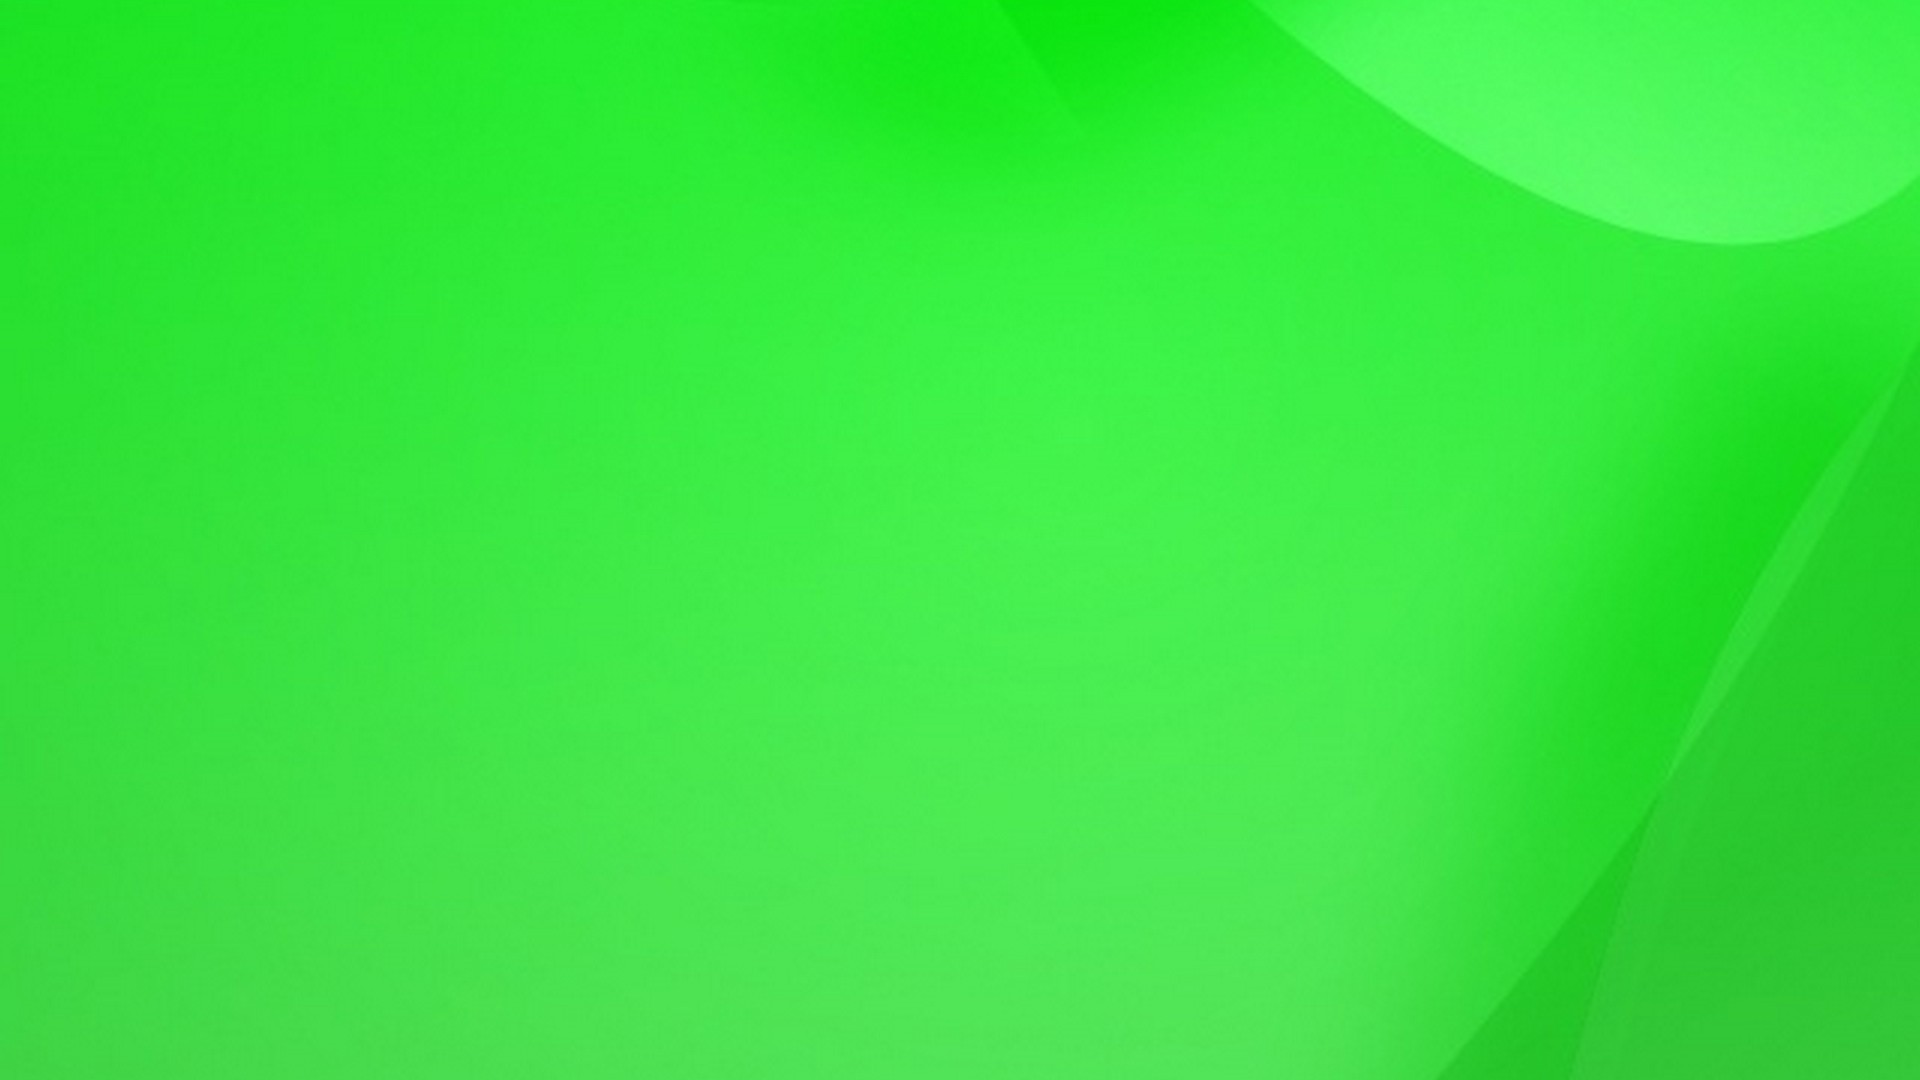 HD Wallpaper Lime Green with image resolution 1920x1080 pixel. You can make this wallpaper for your Desktop Computer Backgrounds, Mac Wallpapers, Android Lock screen or iPhone Screensavers